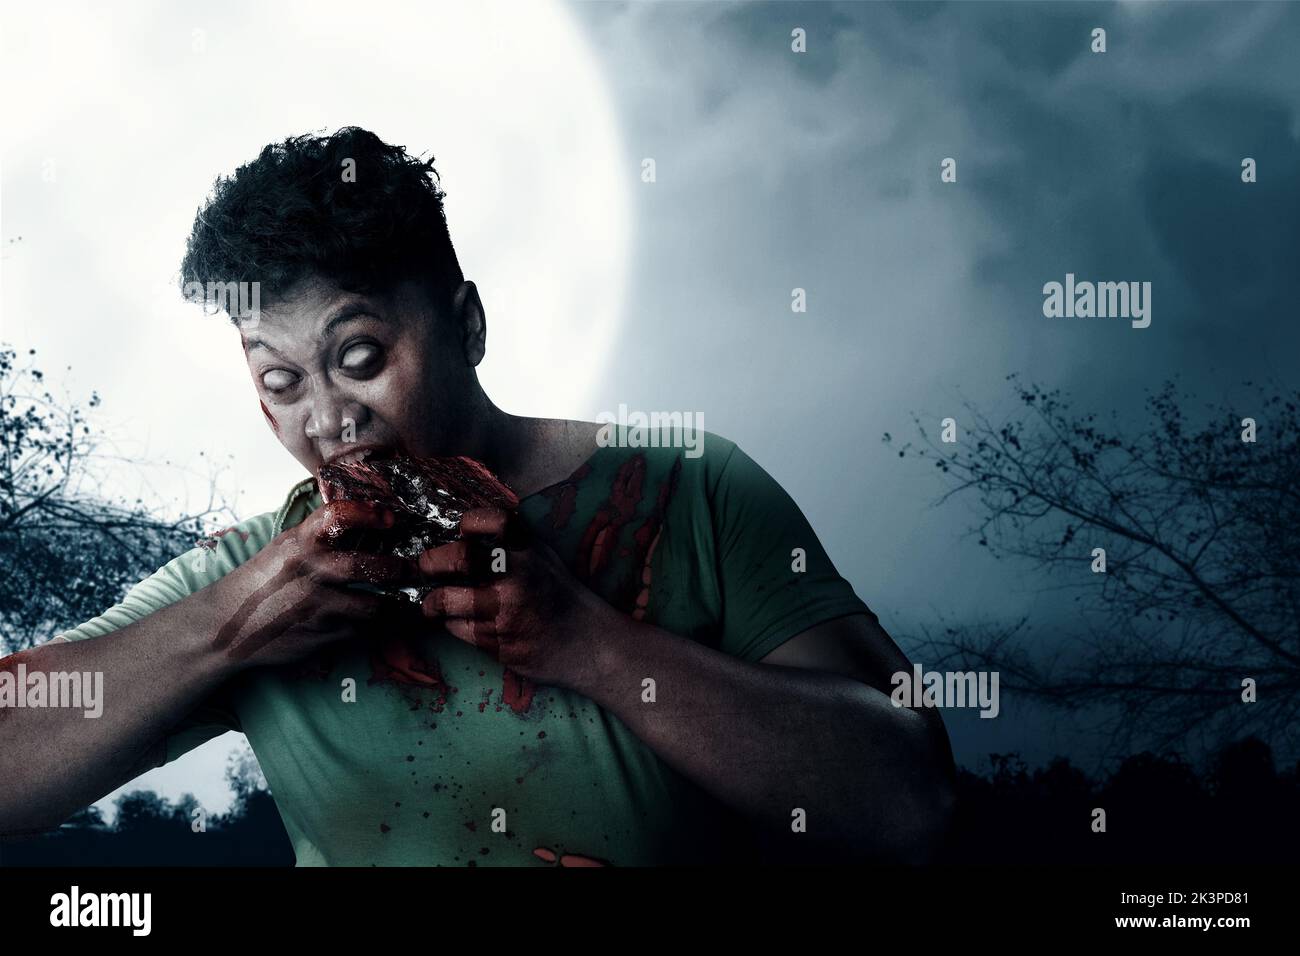 A scary zombie with blood and wound on his body eat the raw meat with the night scene background Stock Photo